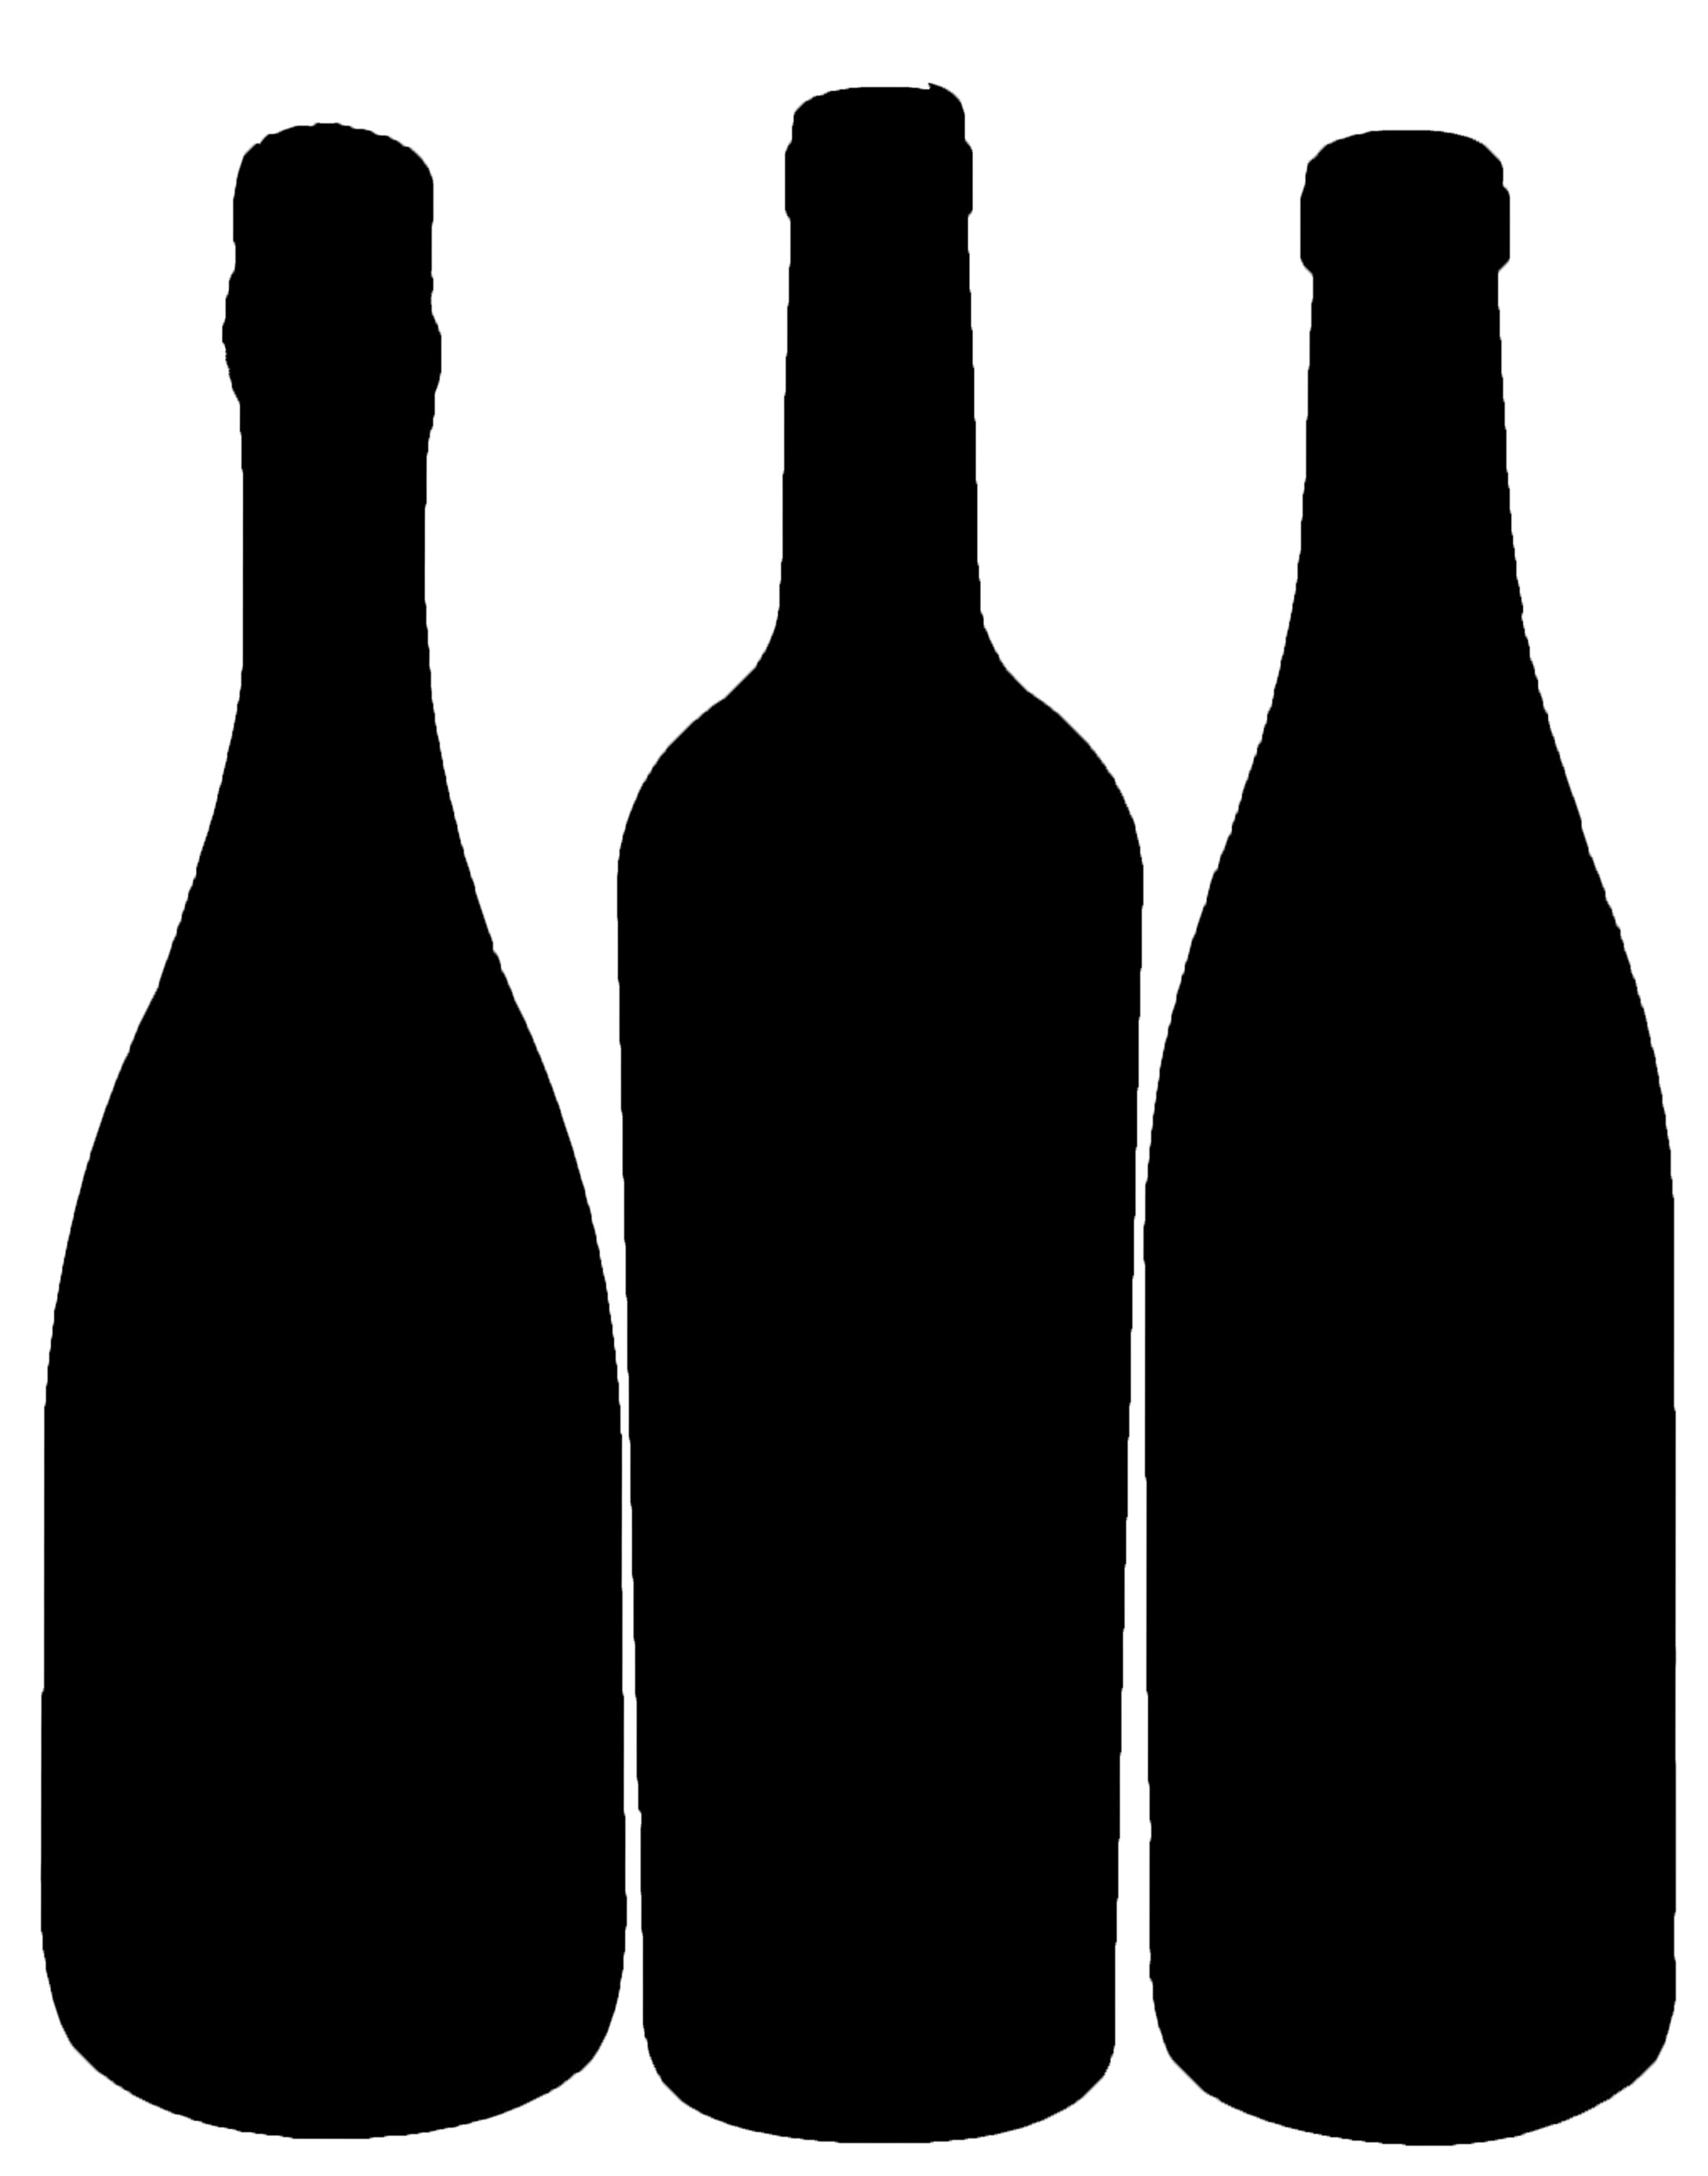 14 Beer Bottle Silhouette Free Cliparts That You Can Download To You    